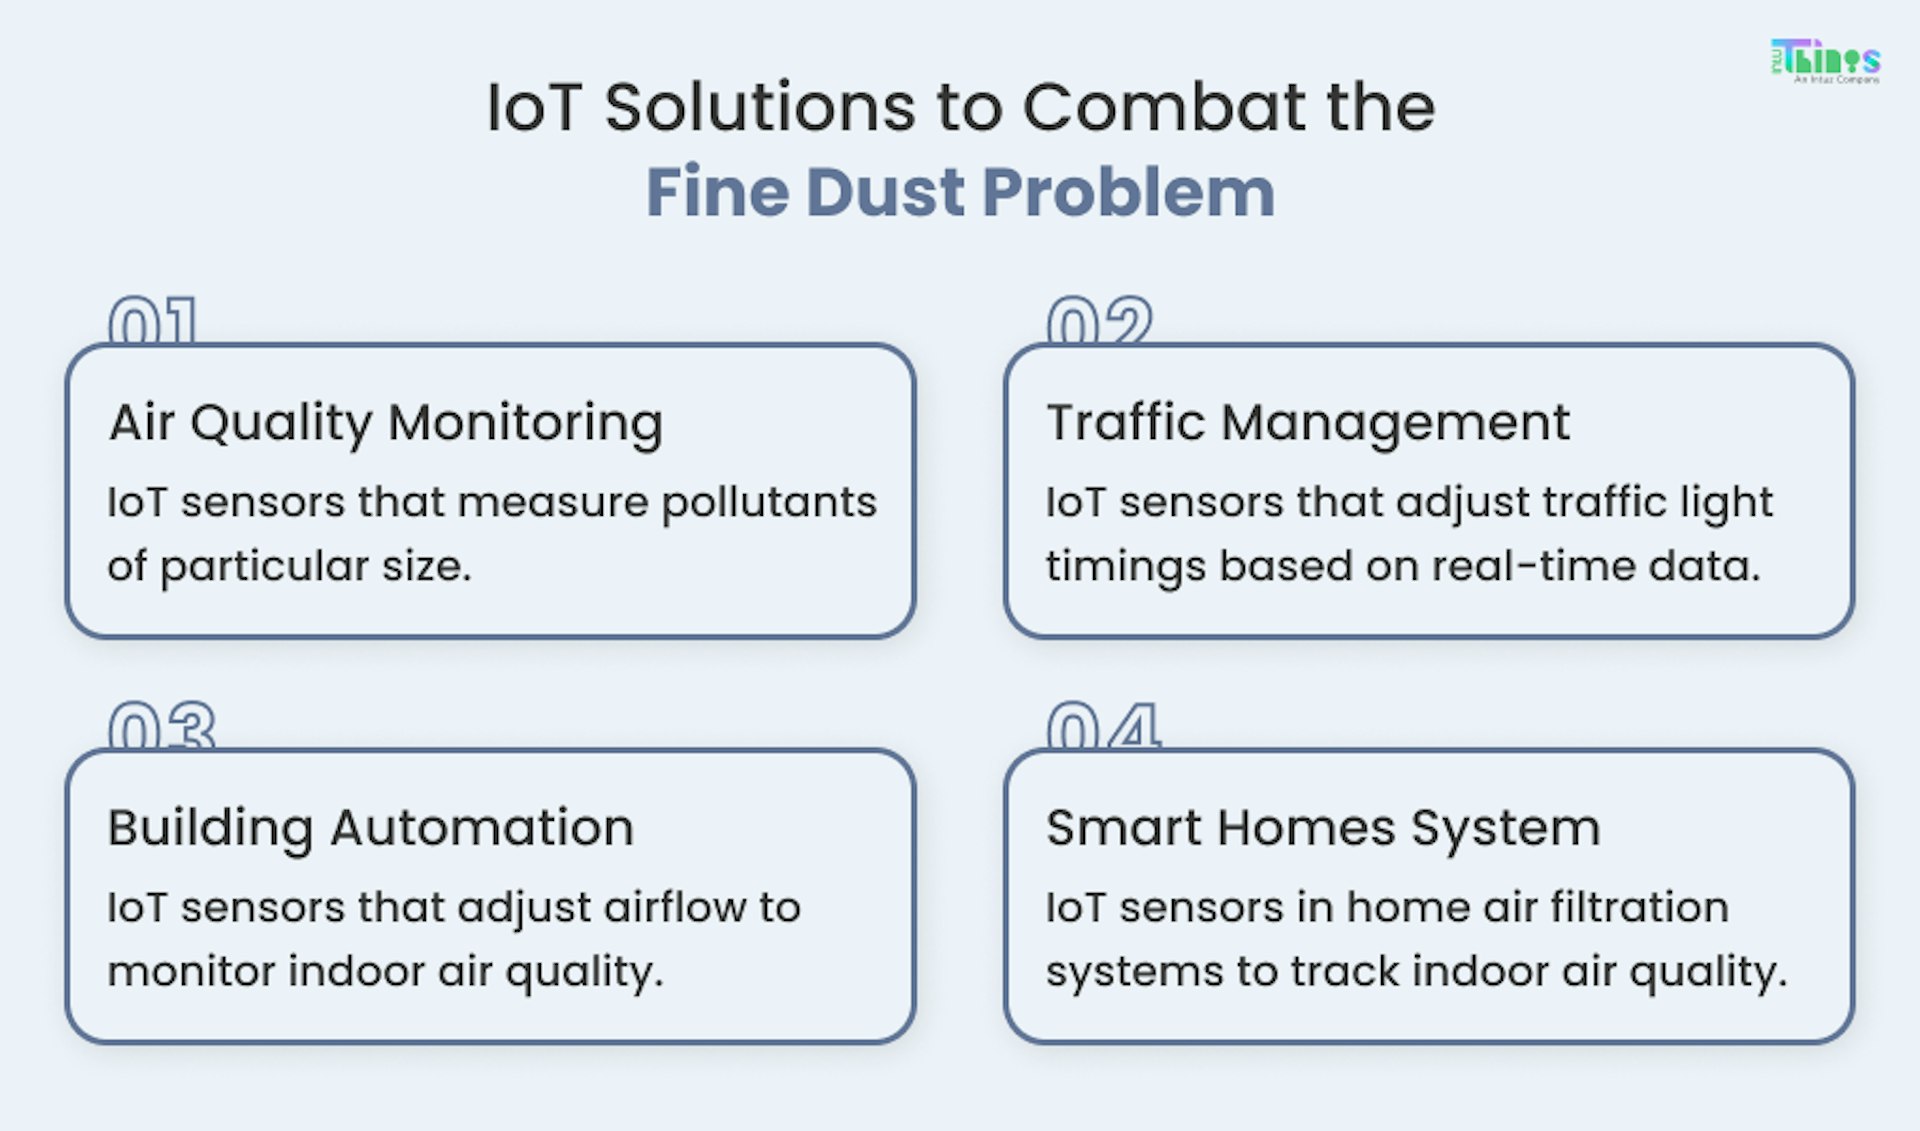 IoT solutions to combat fine dust problem